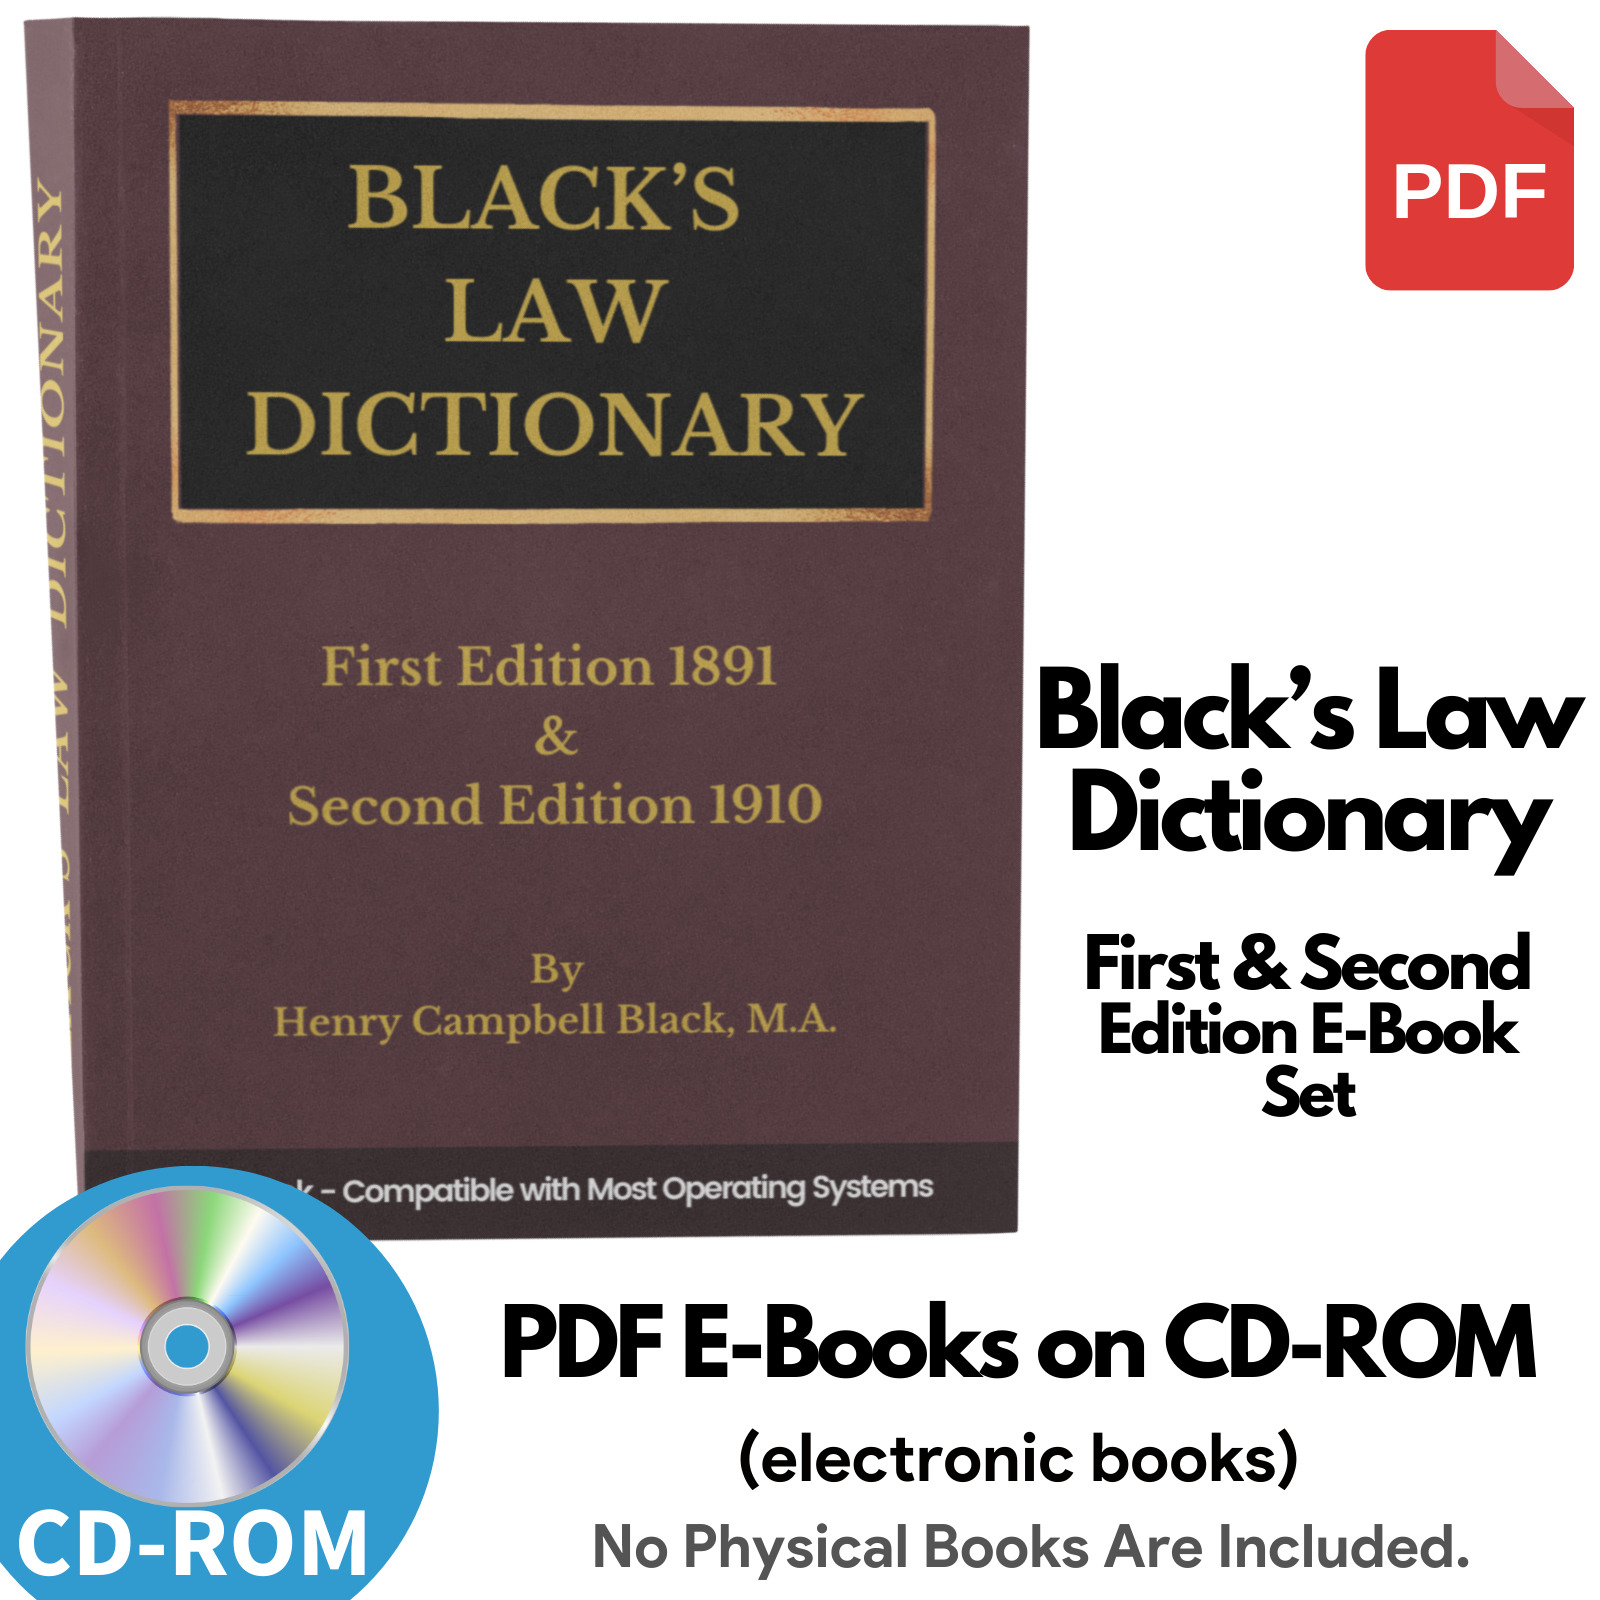 BLACK\'S LAW DICTIONARY, 1st Edition 1891 and 2nd Edition 1910 Law Book on CD-ROM